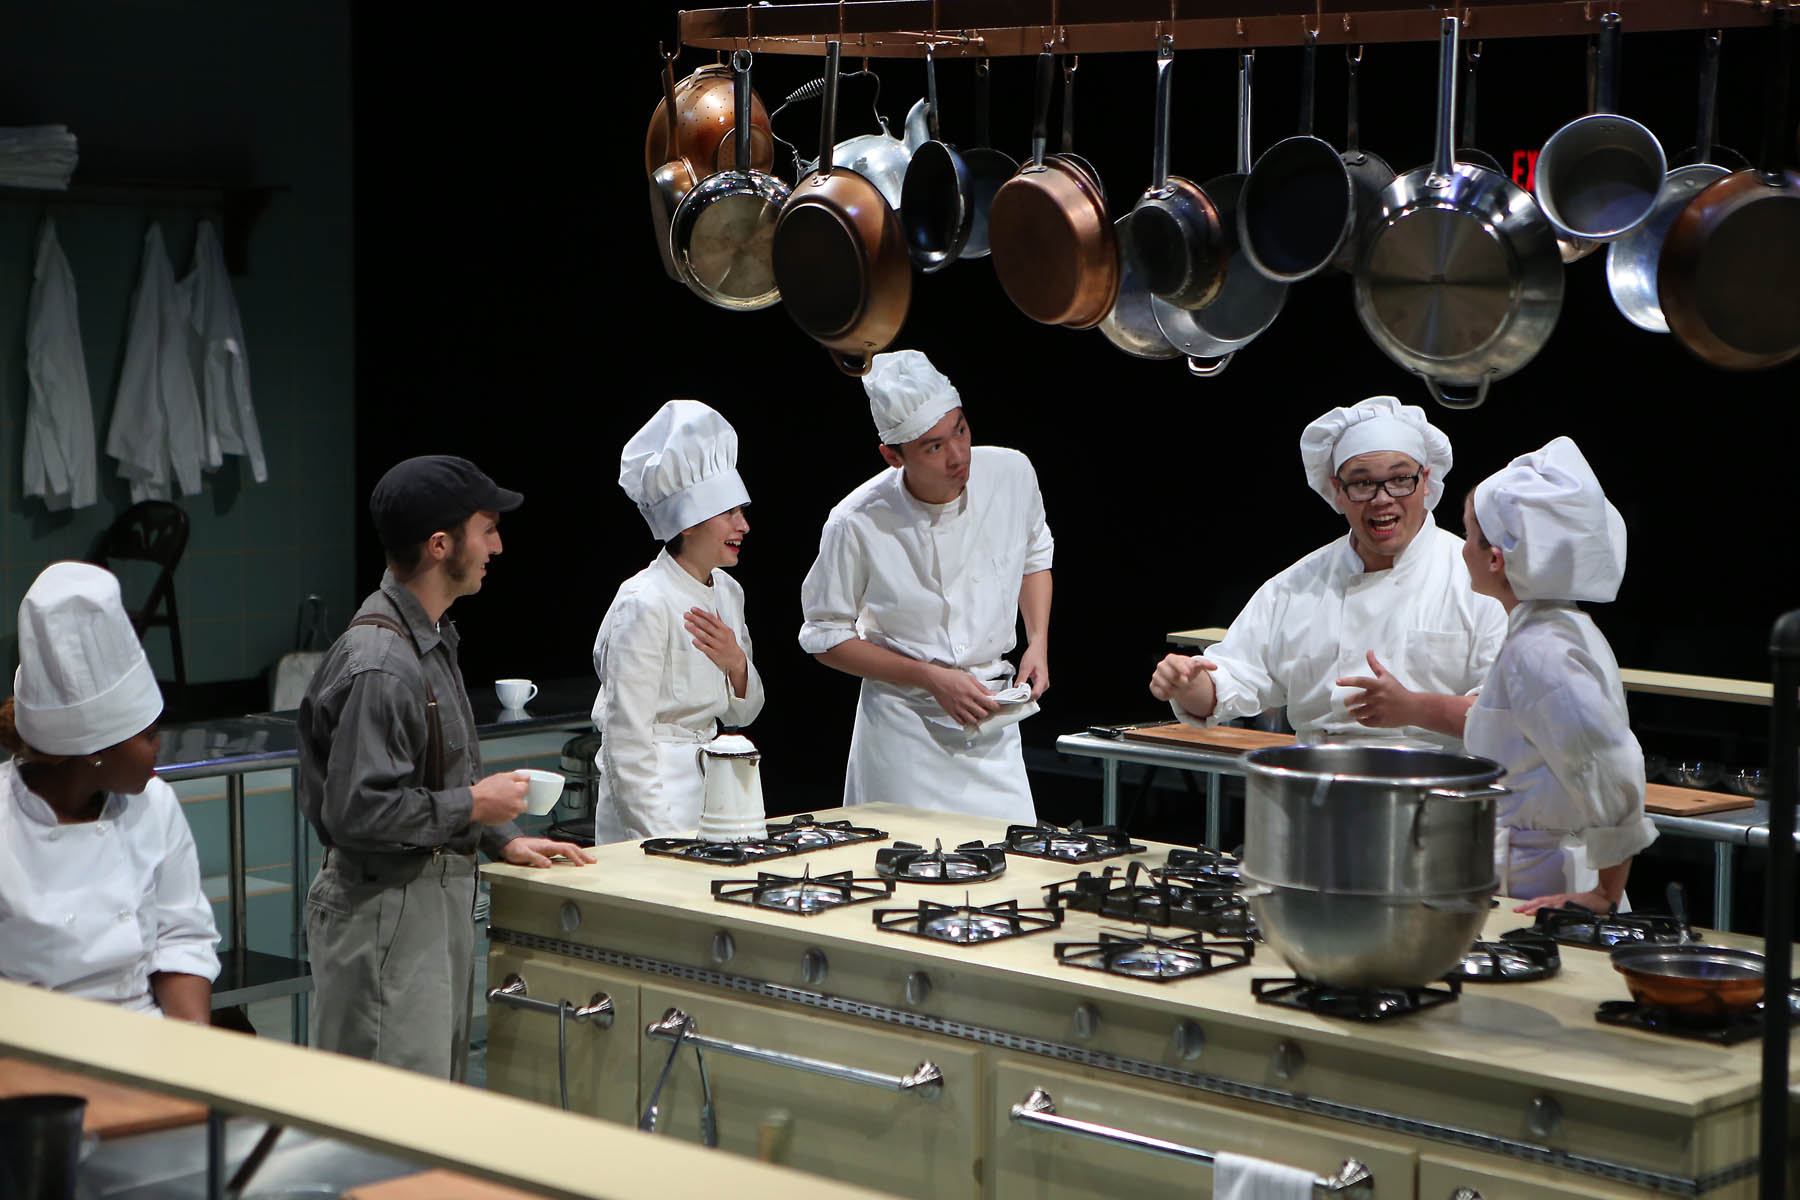 2014 The Kitchen, Directed by Andrew Manley <span class="cc-gallery-credit"></span>